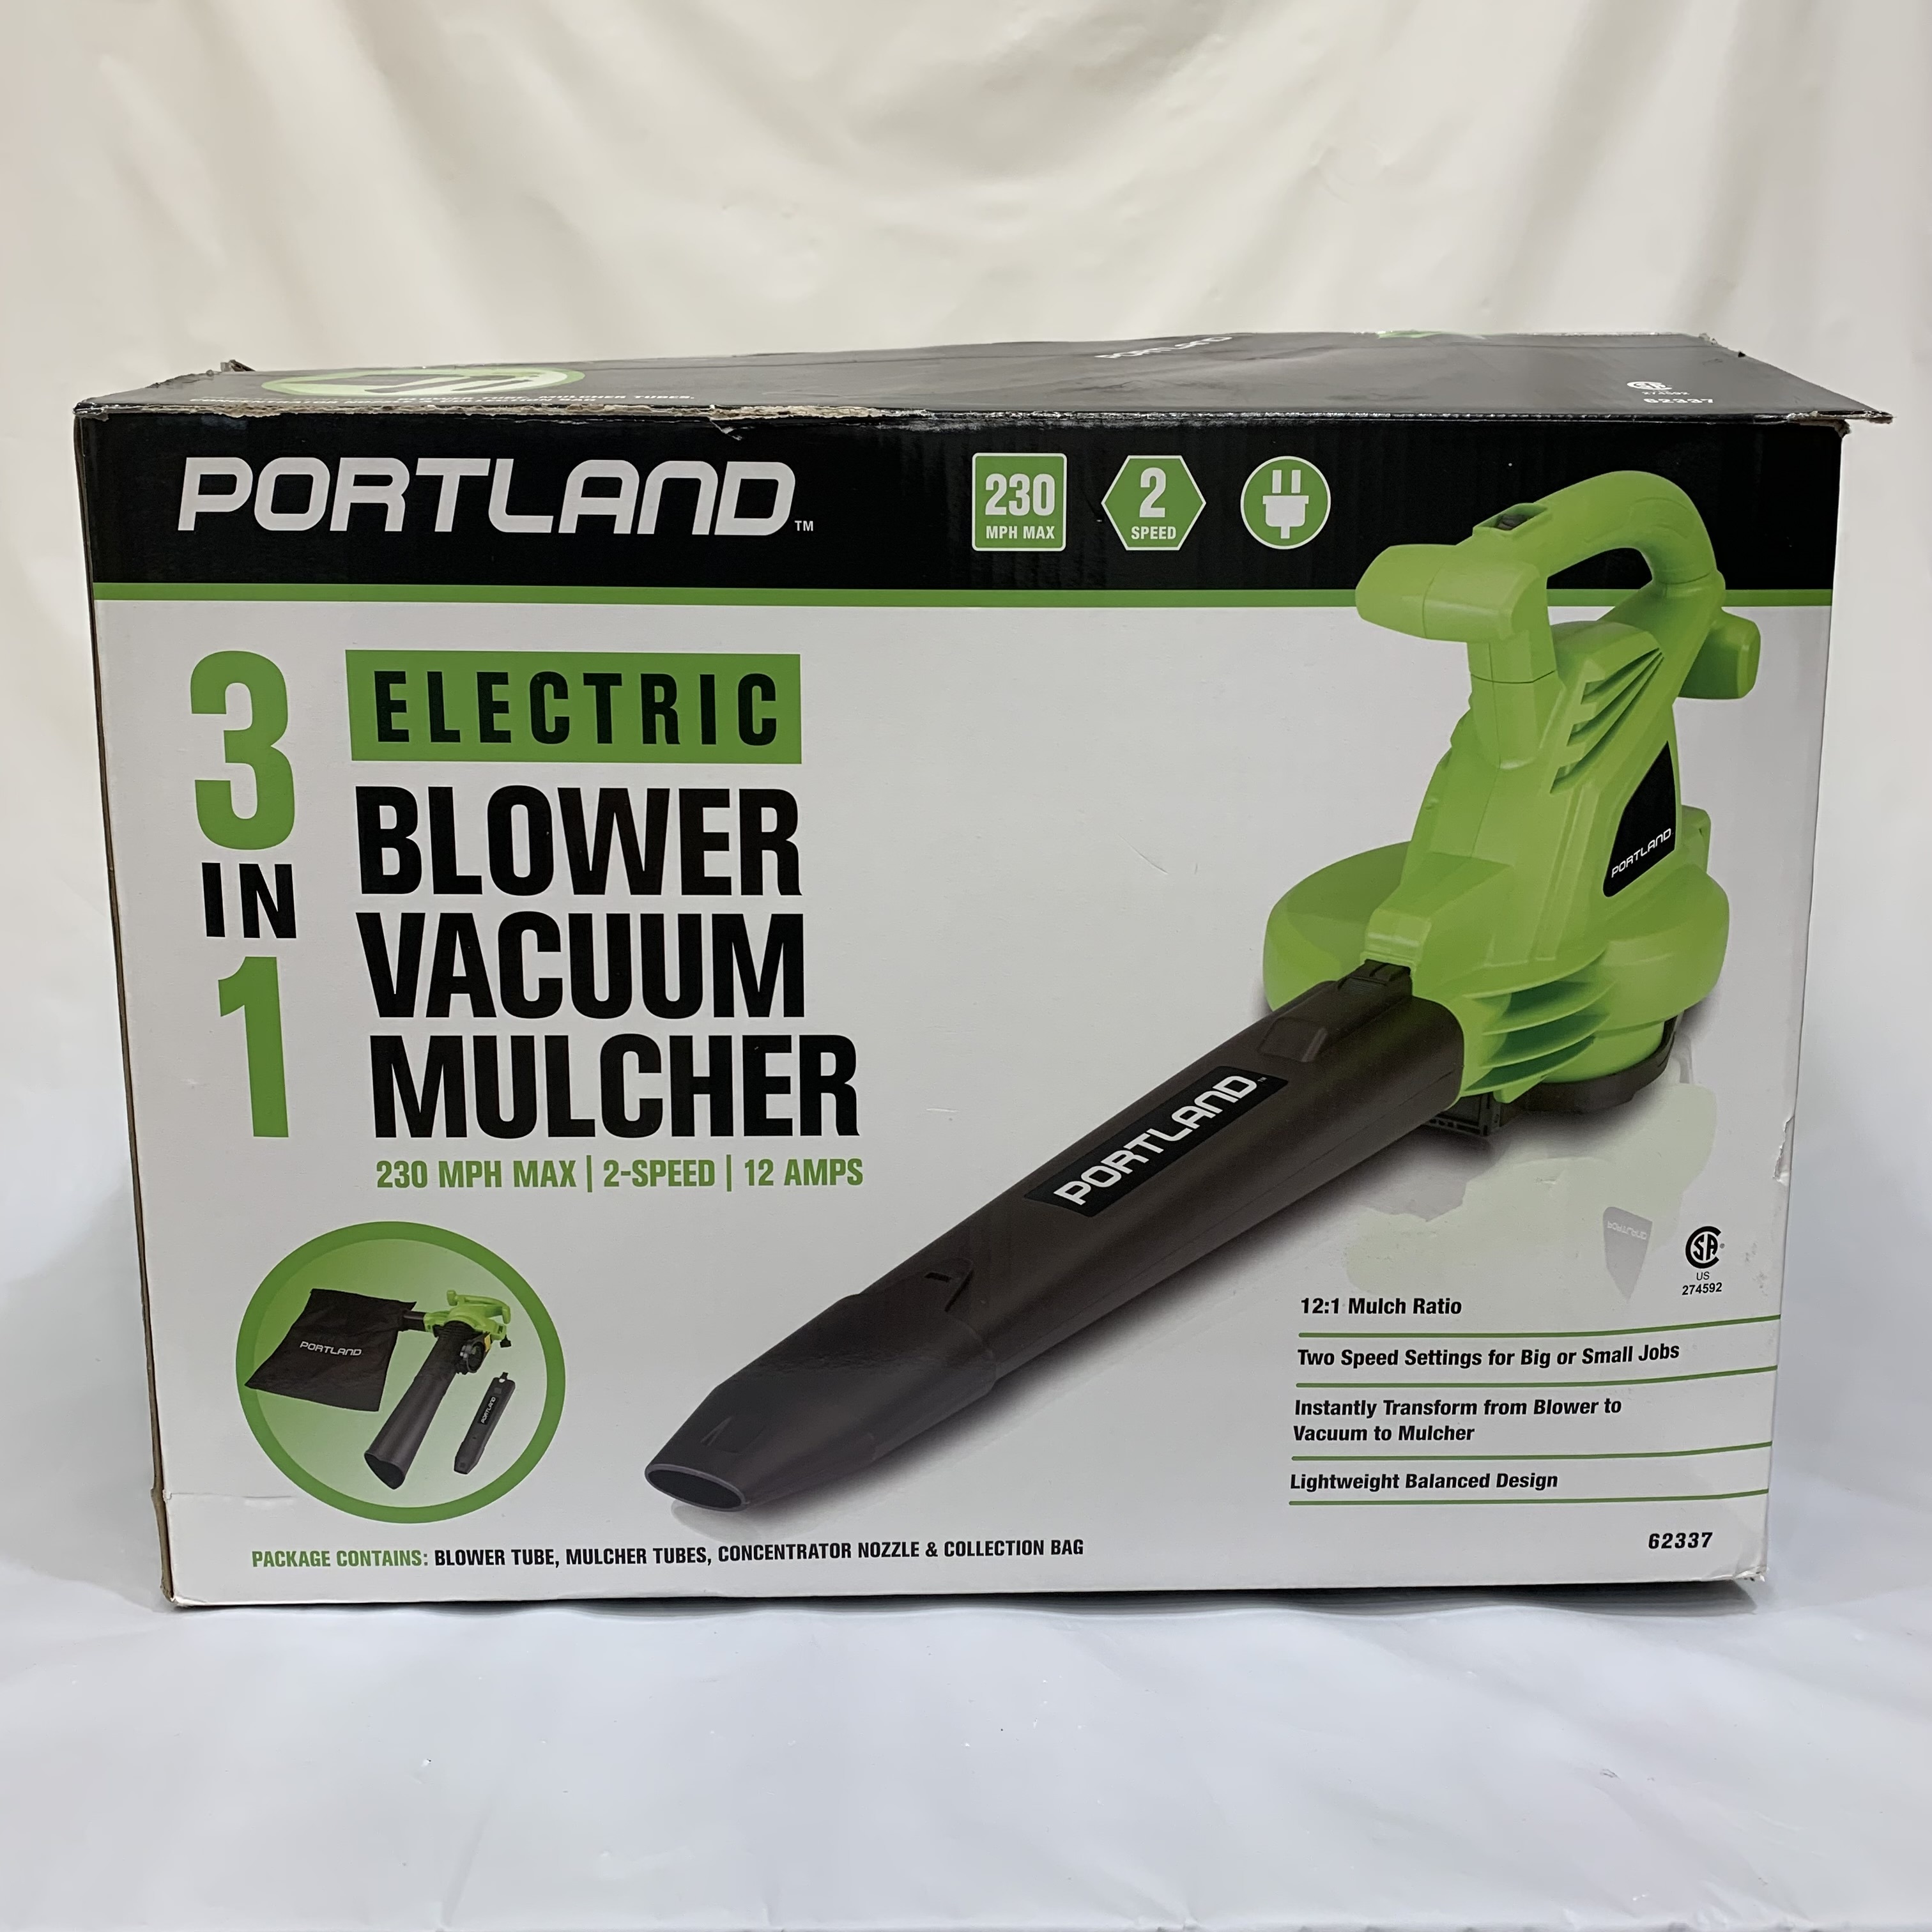 PORTLAND 3-In-1 Electric Blower Vacuum Mulcher for $39.99 – Harbor Freight  Coupons